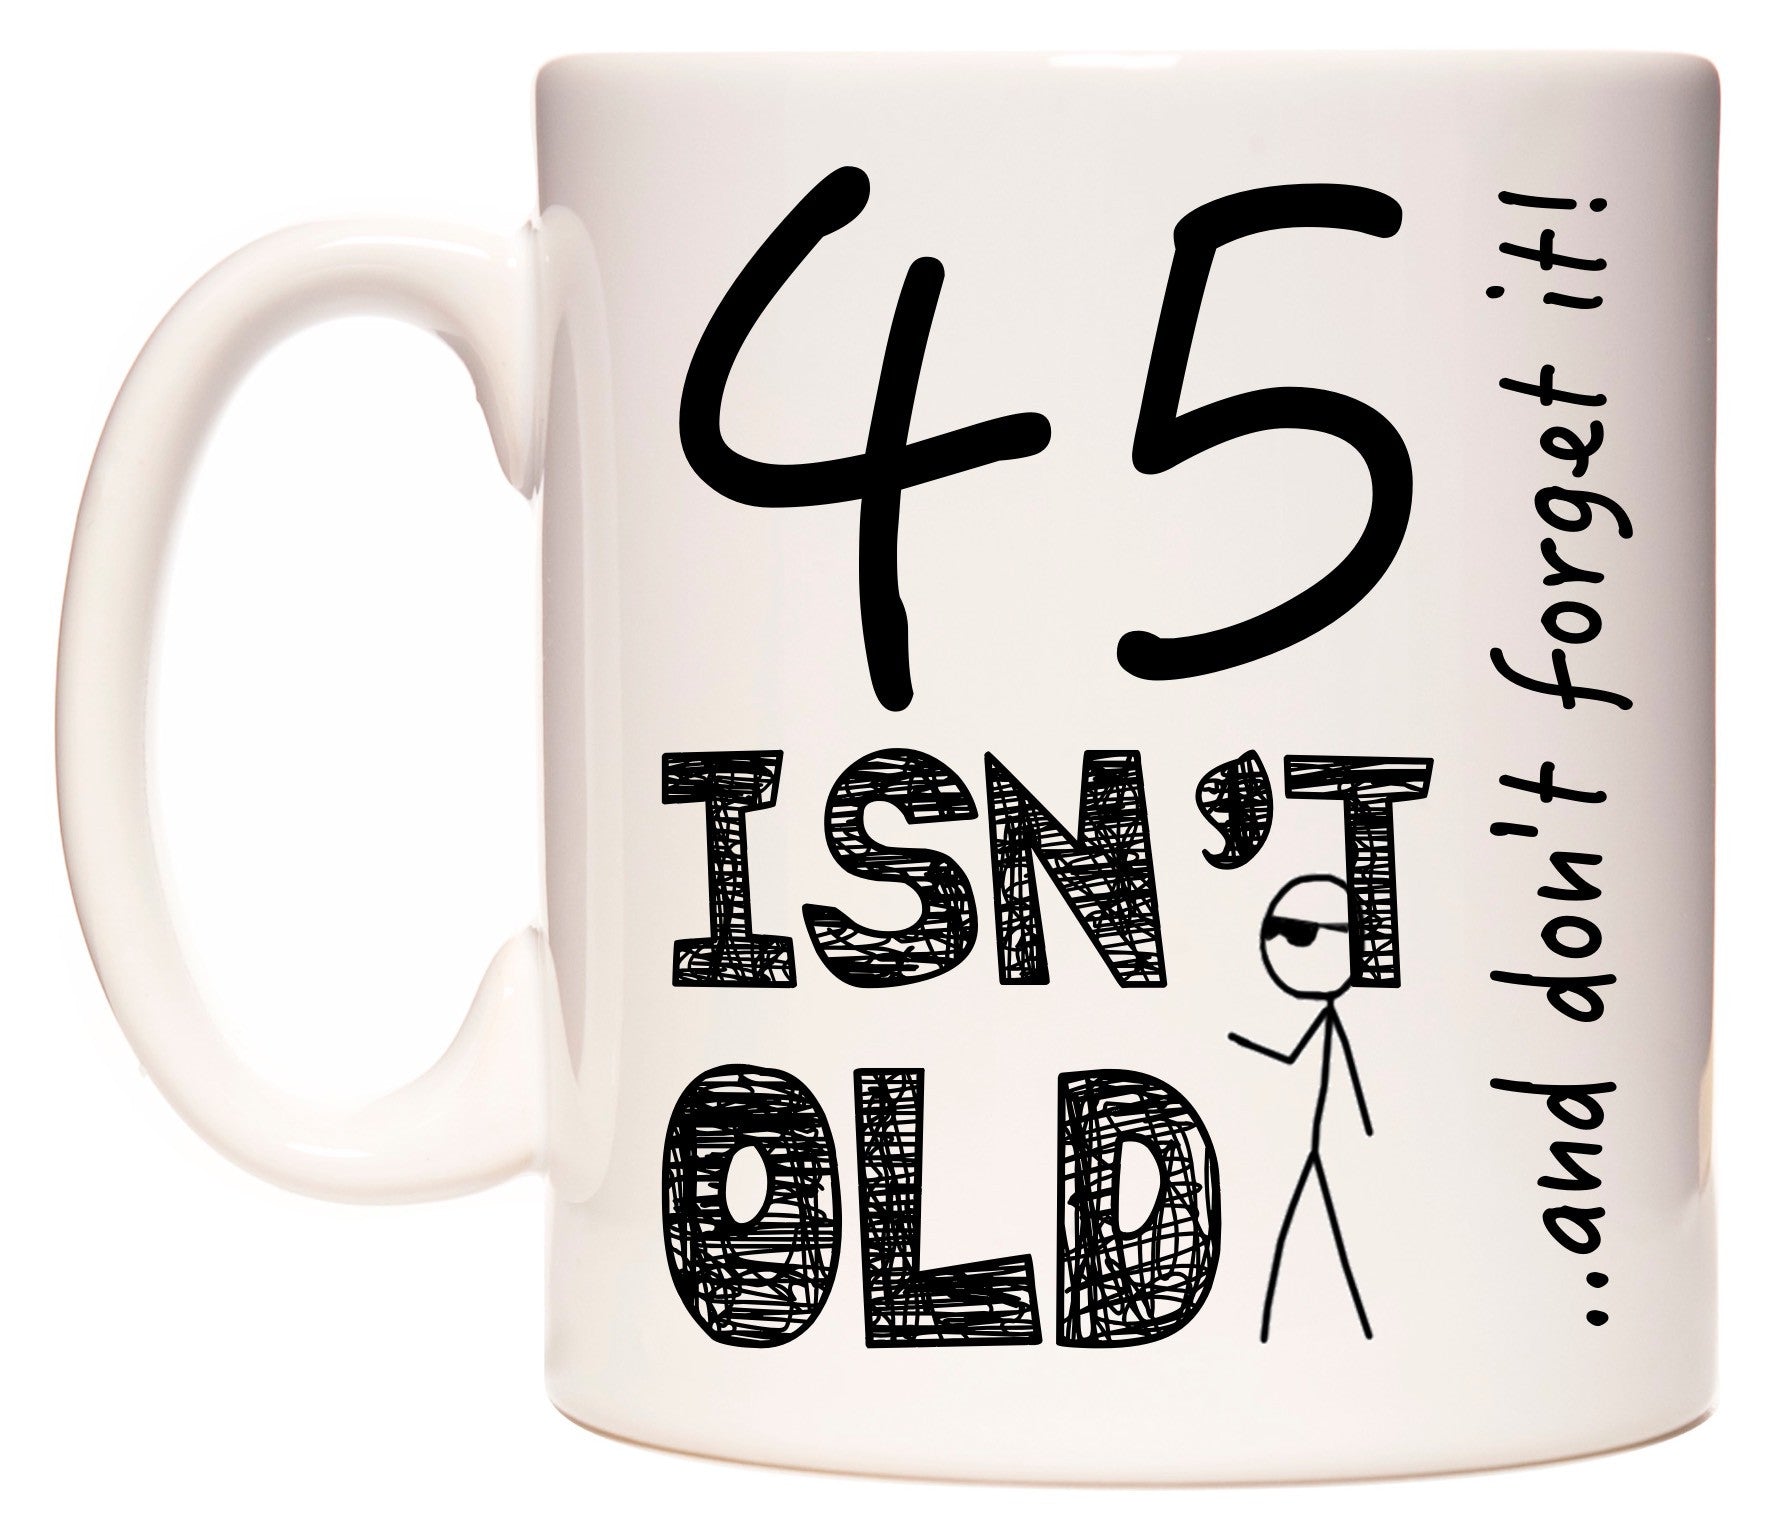 This mug features 45 Isn't Old